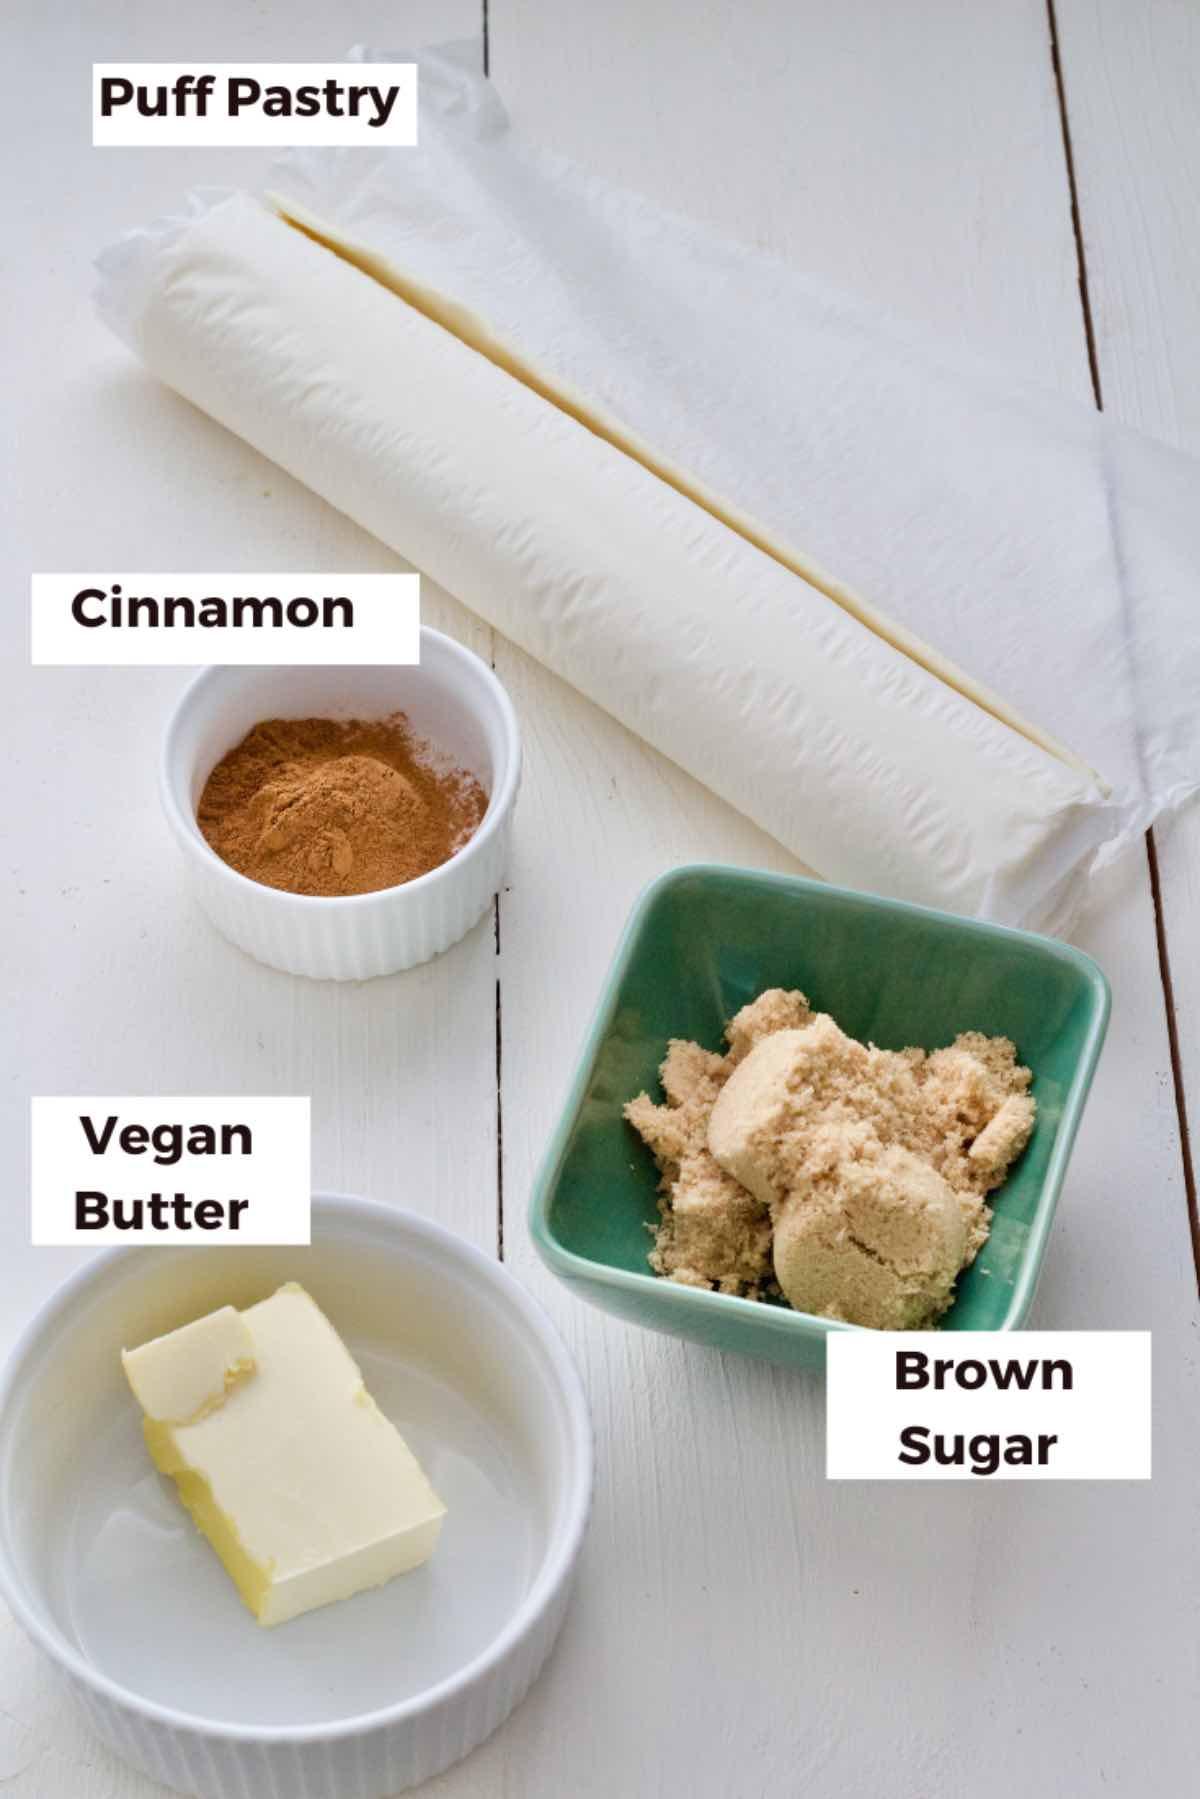 Ingredients to make puff pastry cinnamon twists.